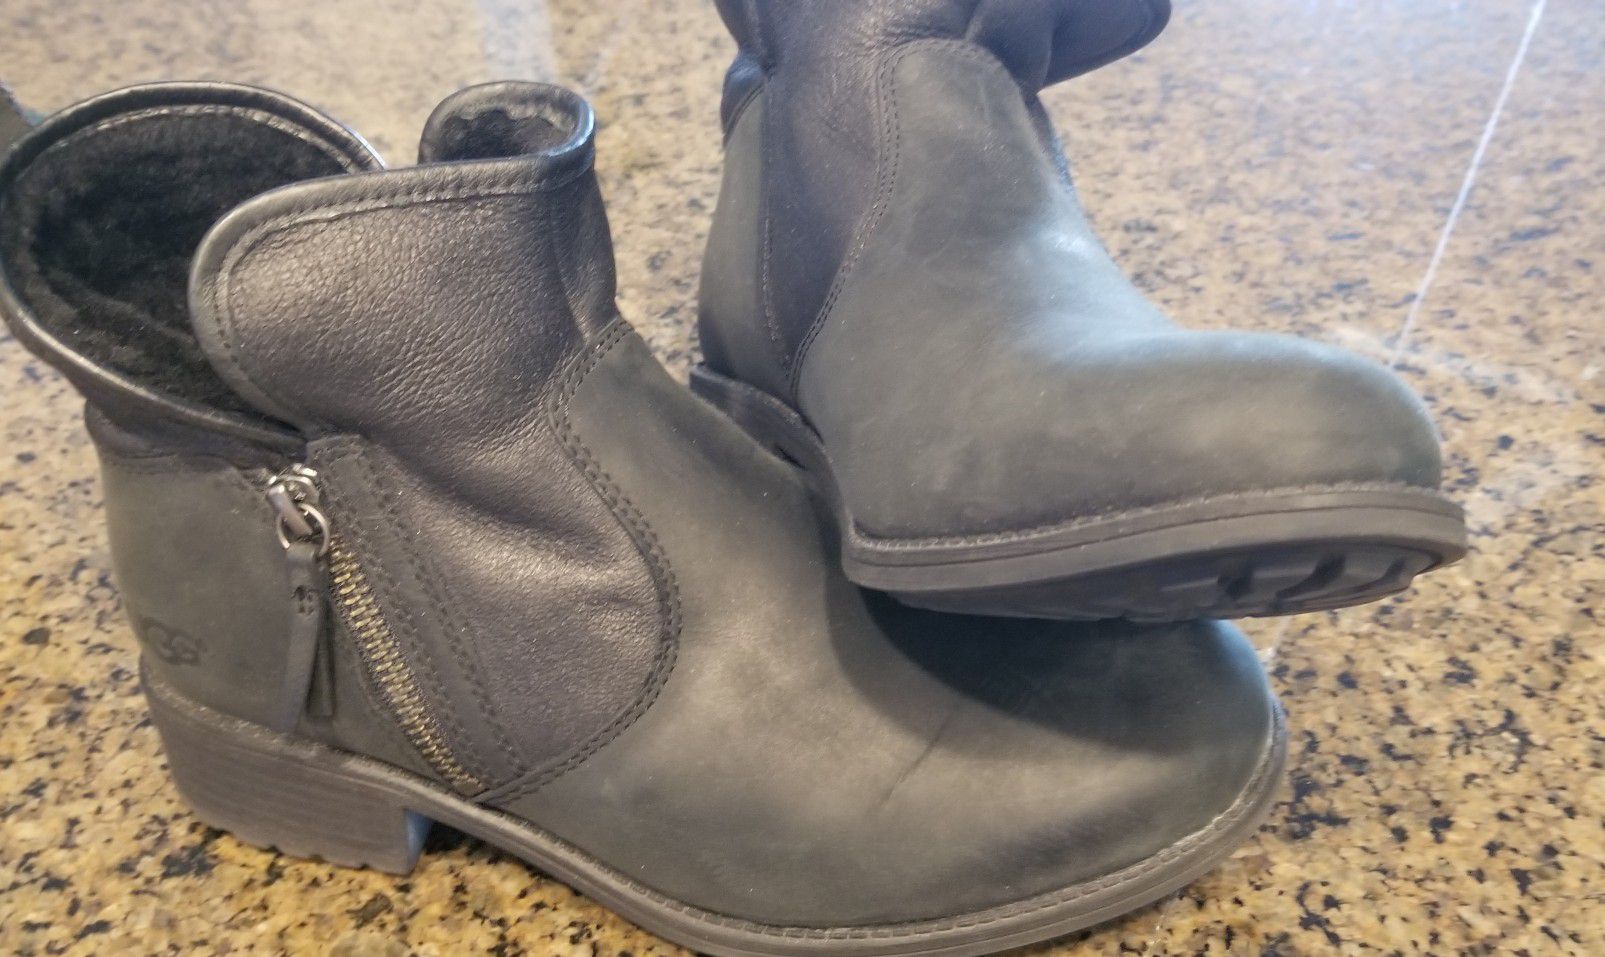 Ugg's, size 8.5. Great condition.